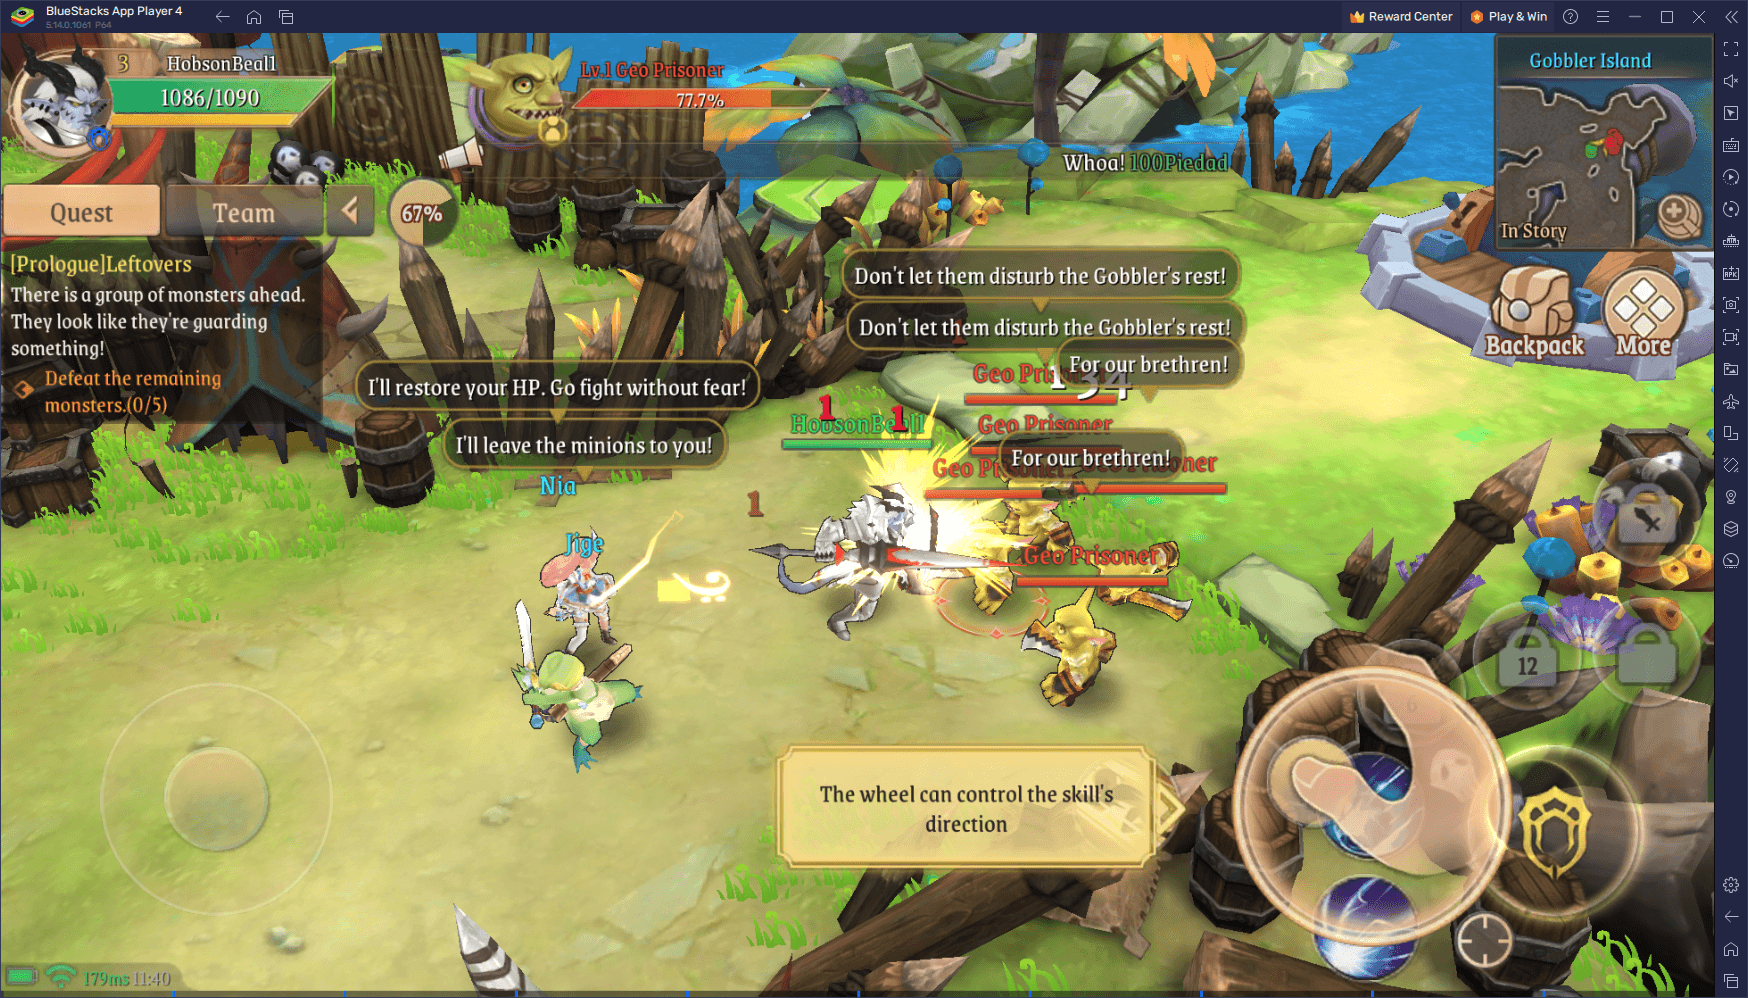 Enhance Your Fantasy Tales Experience on PC with our BlueStacks Features